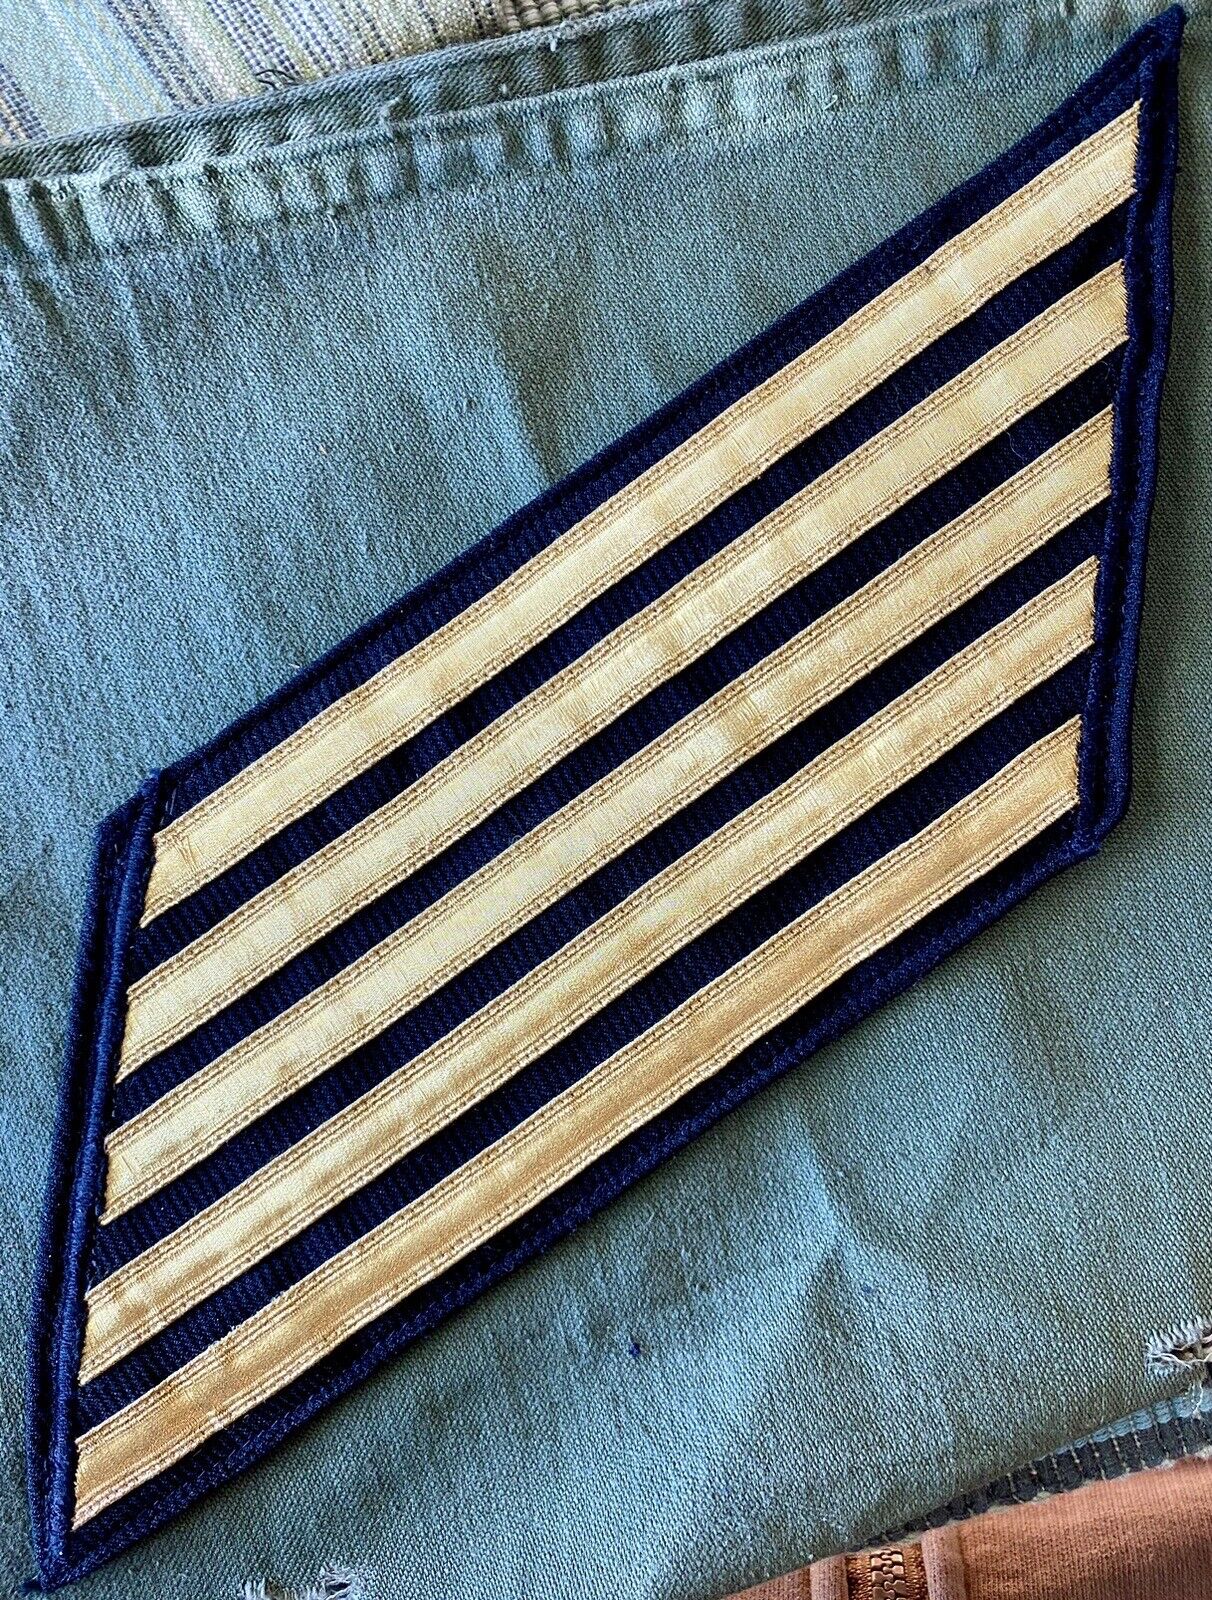 US Navy Gold Five Bar CPO Service Stripes or 5 bar Hashmarks 20 years of service